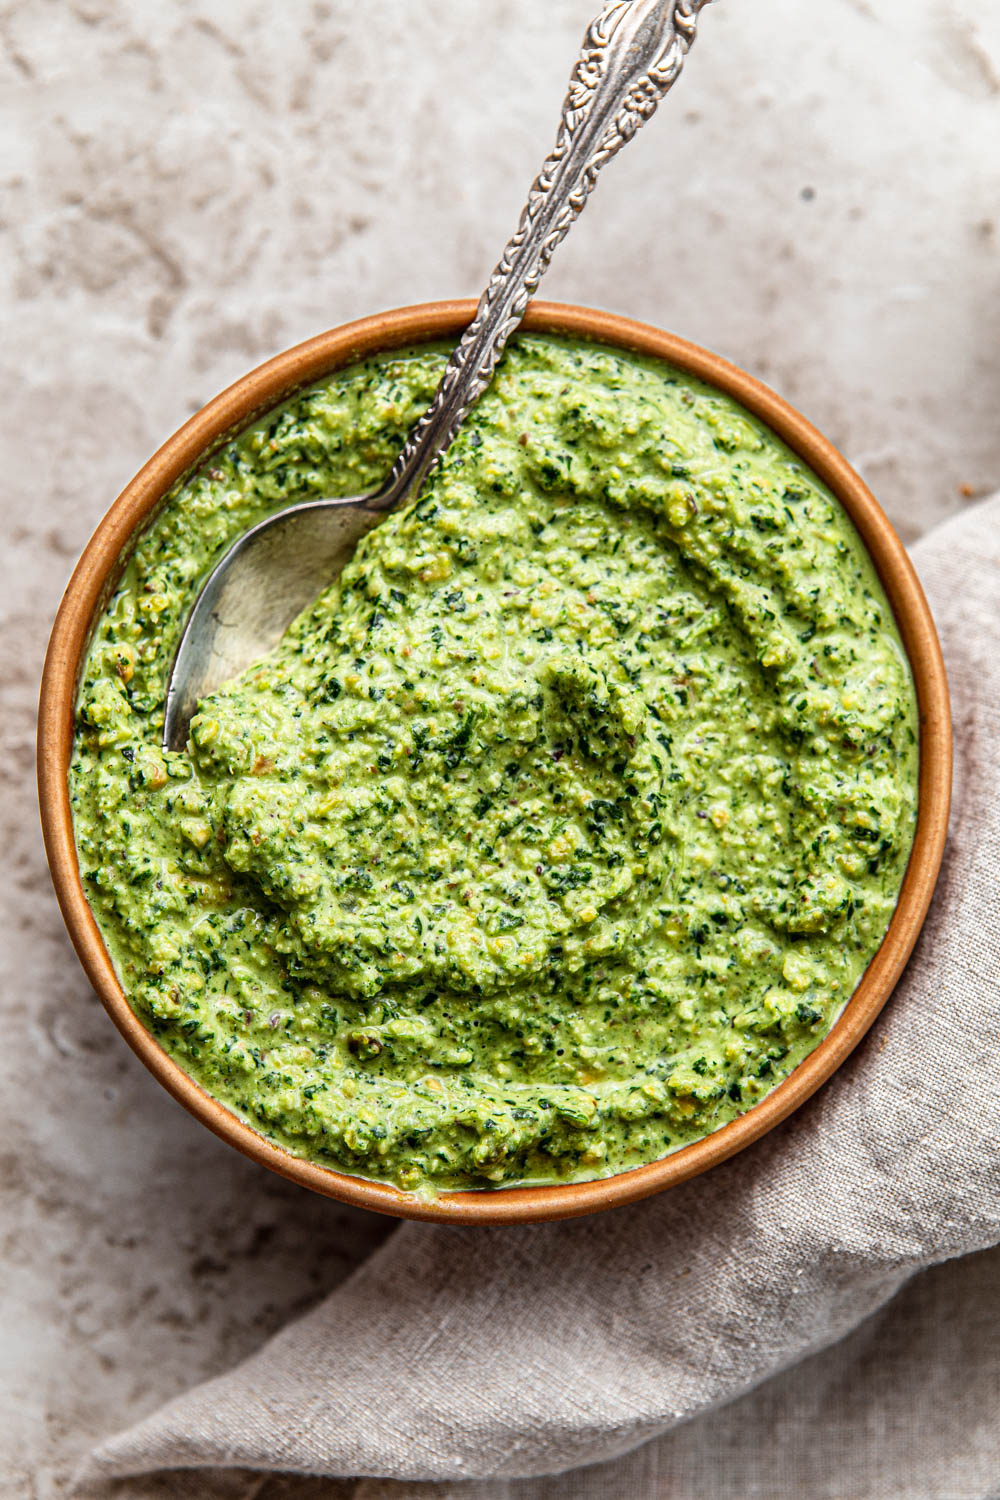 green pesto sauce made with kale and pistachios